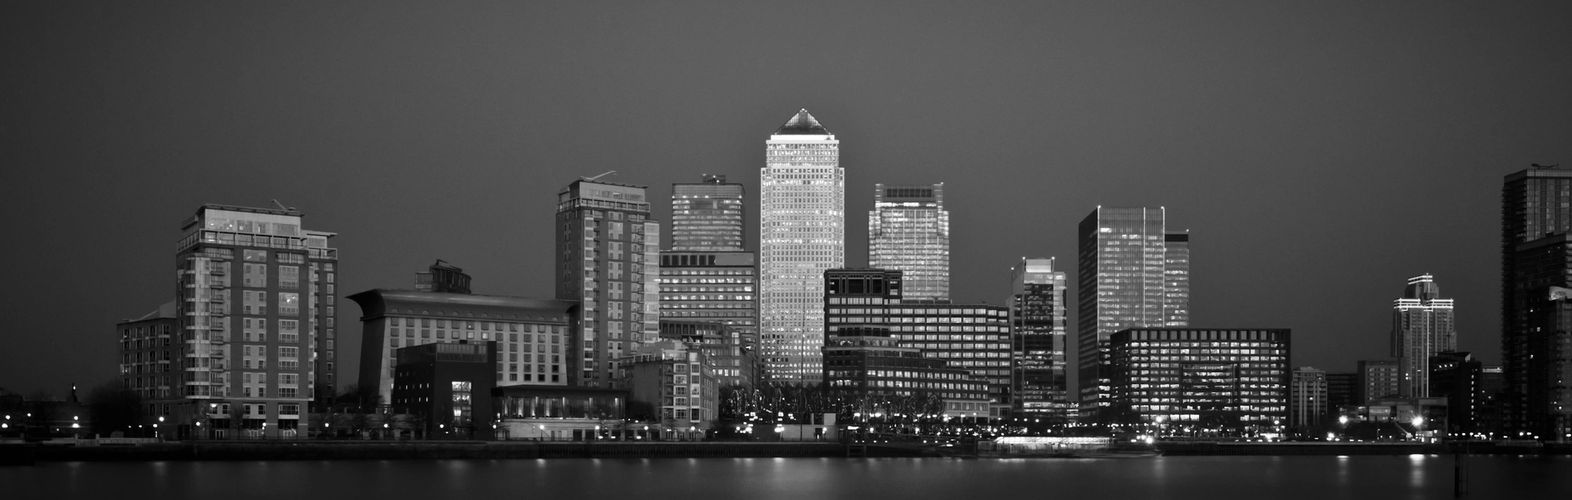 Canary Wharf - where the arch villain in The Legacy has his headquarters